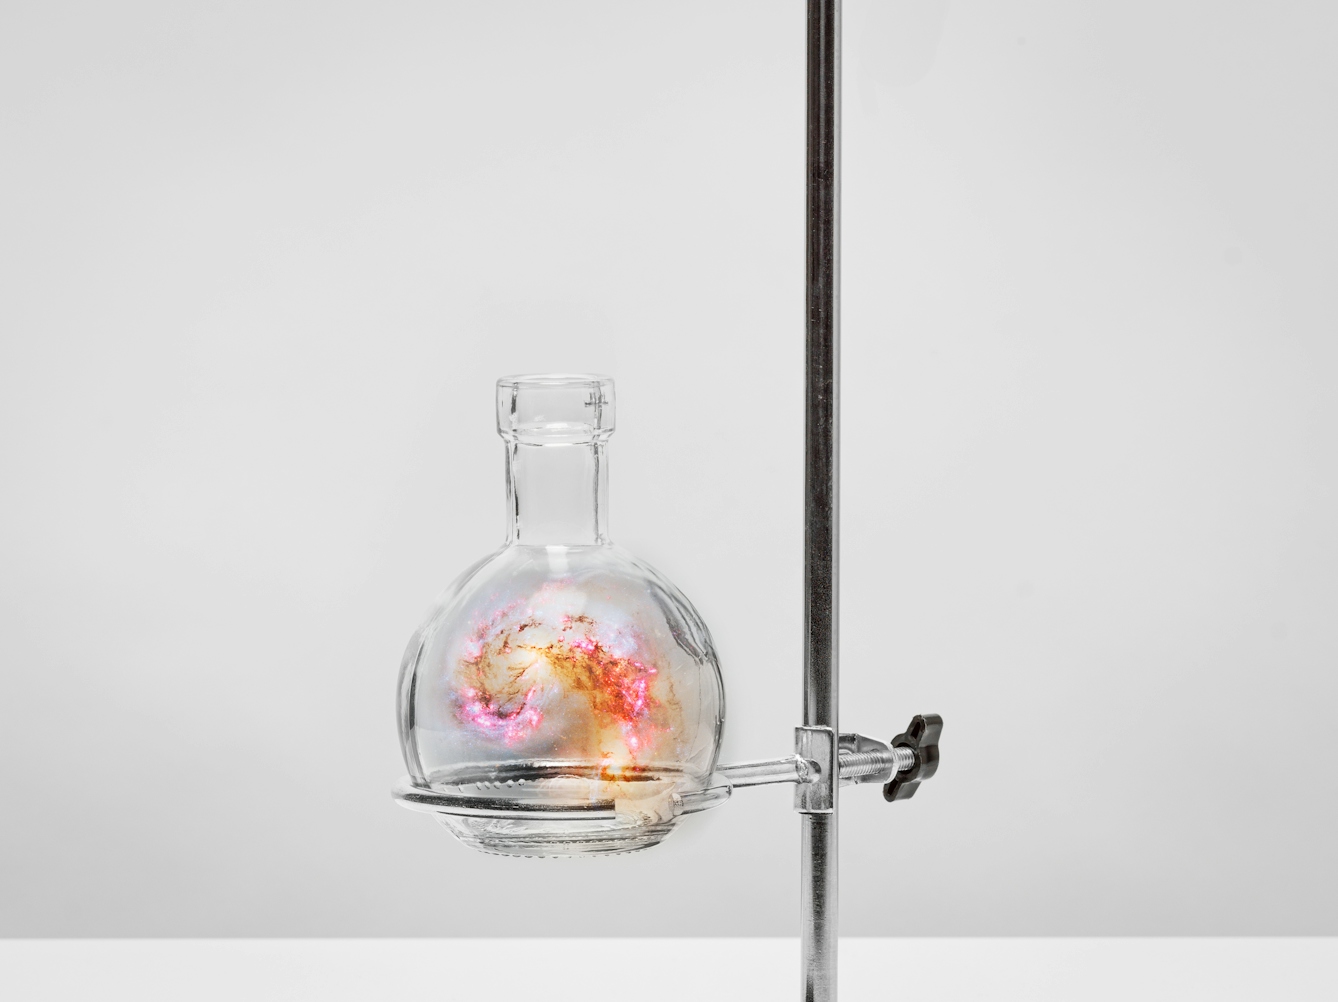 Photograph of a single vertical bar, set against a plain grey background. Clamped to the bar is a horizontal bar and clamp. At the end of the bar is a glass, rounded, flat bottomed flask. Swirling inside the flask is a scene of the galaxy, revealing colourful constellations, swirling stars and gaseous nebula. 